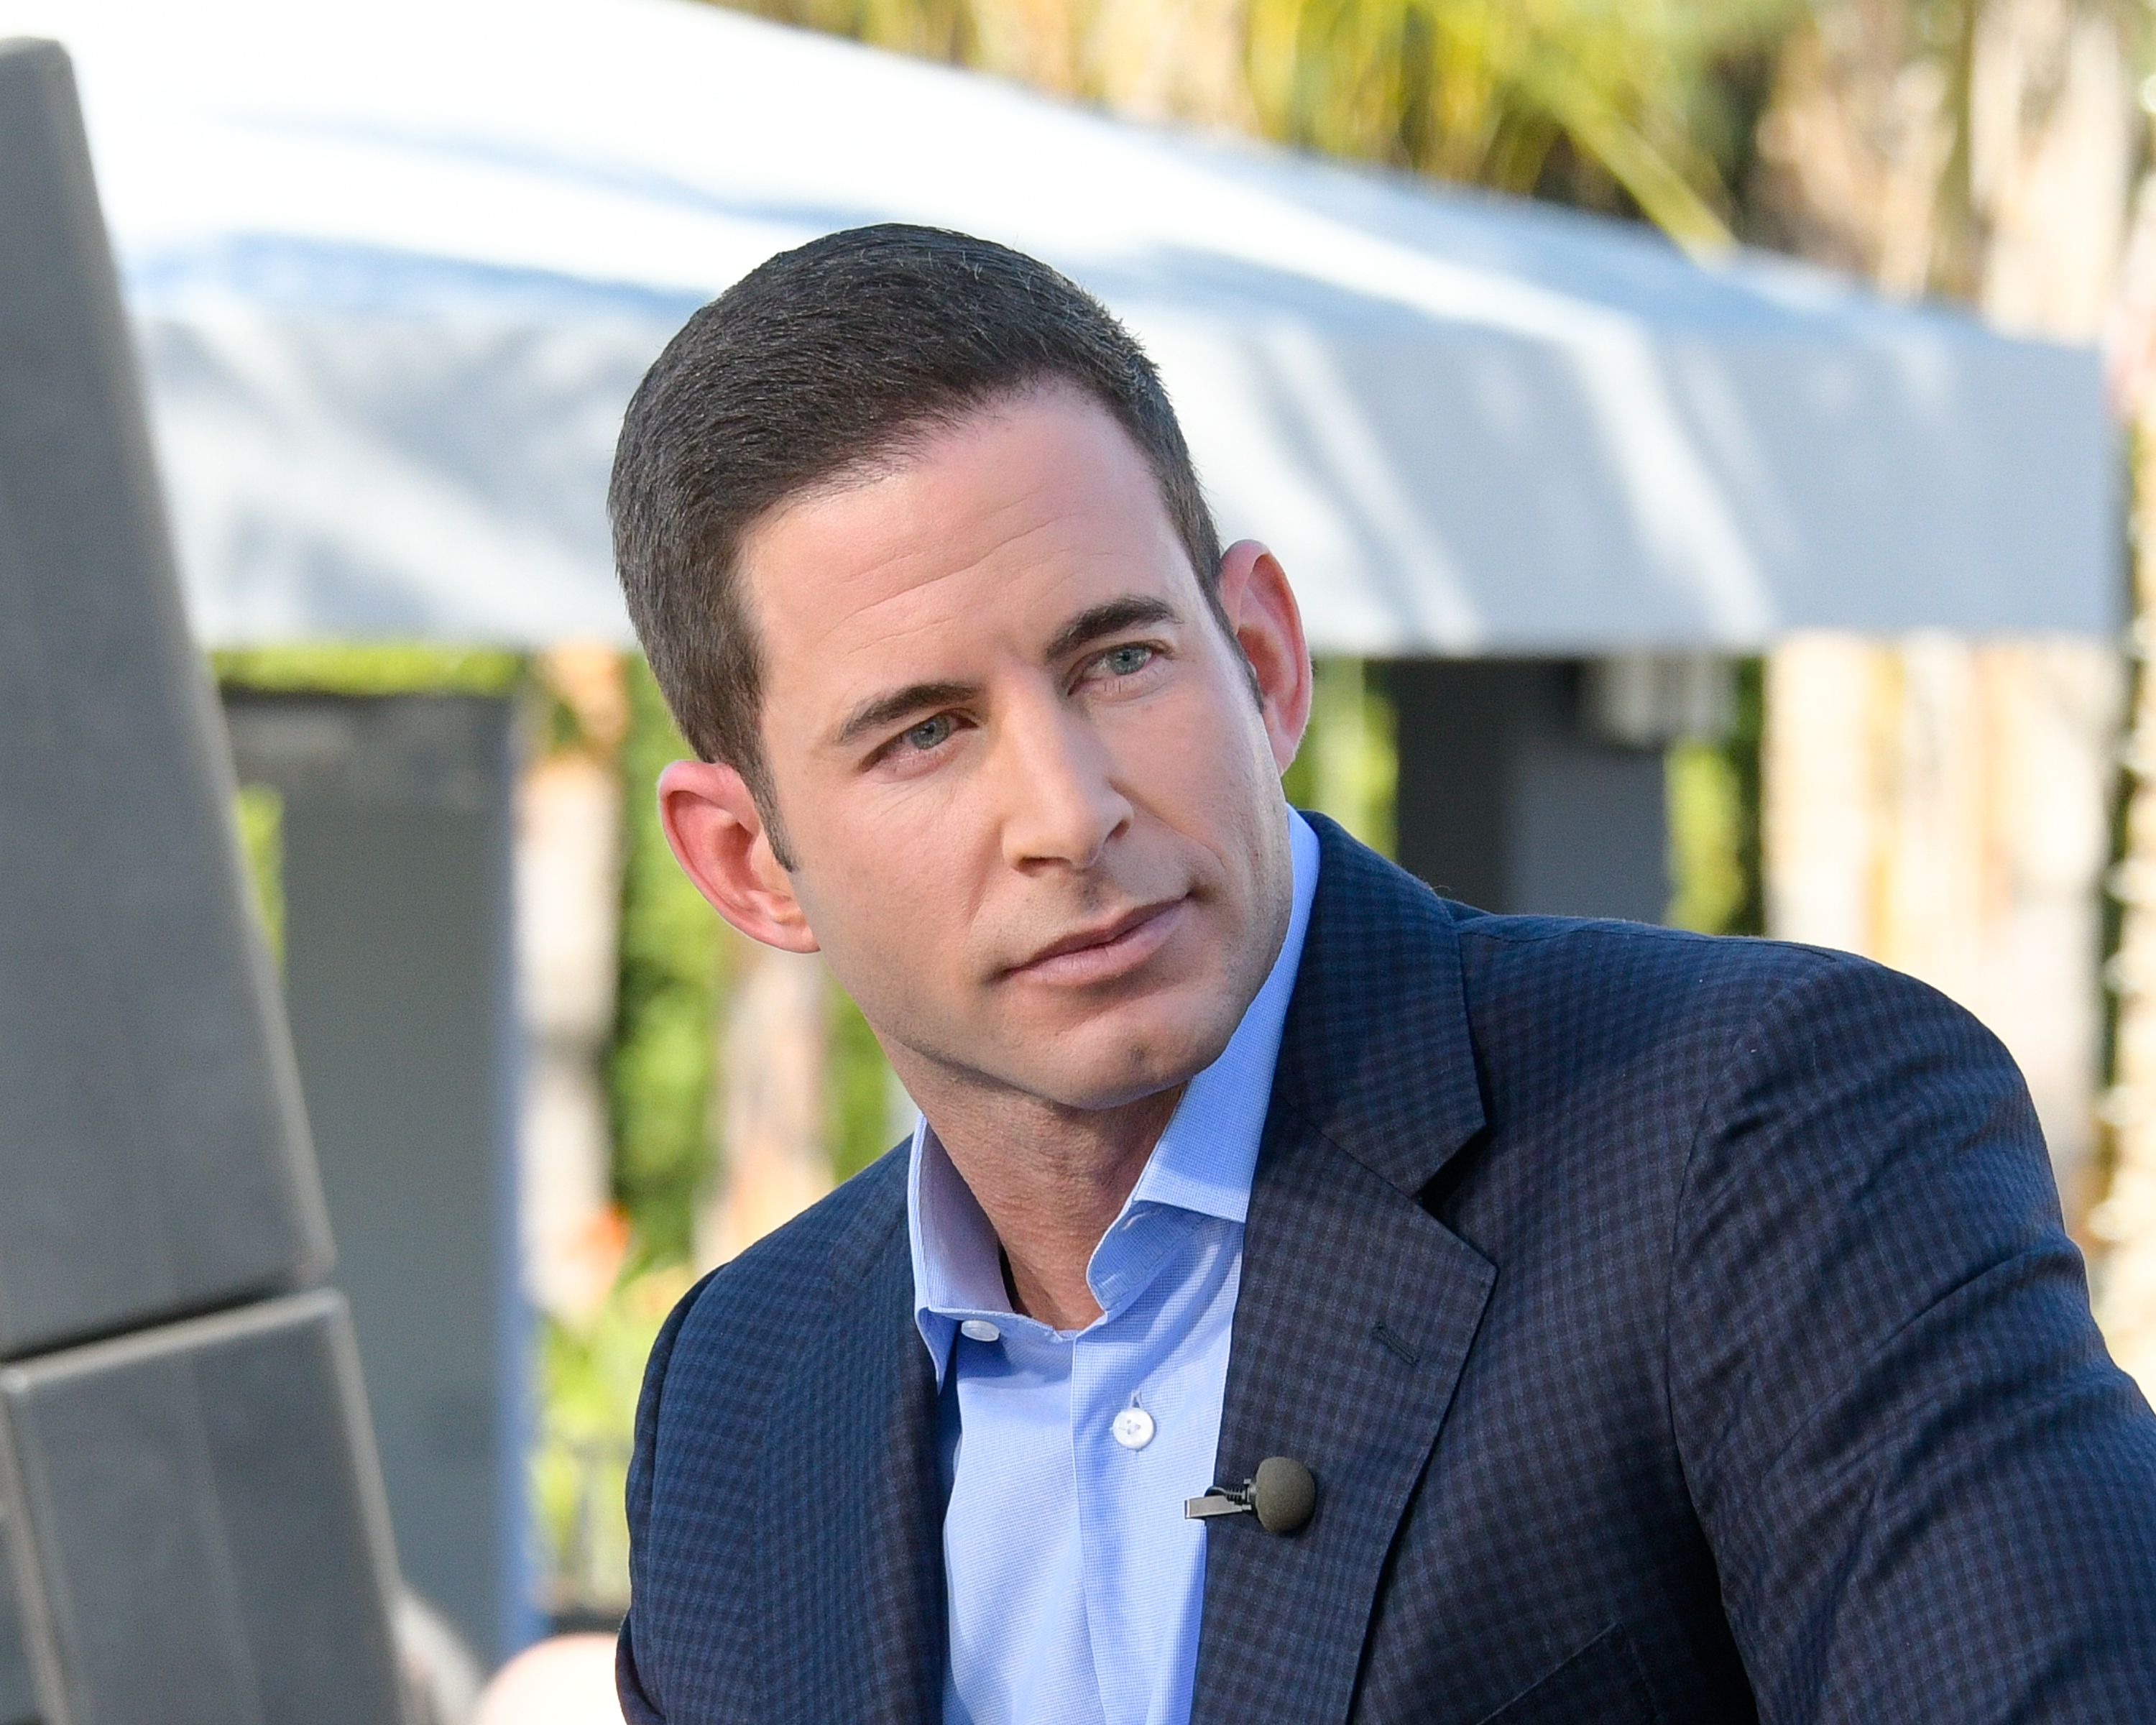 Tarek El Moussa at "Extra" at Universal Studios Hollywood on February 28, 2017 | Photo: Getty Images